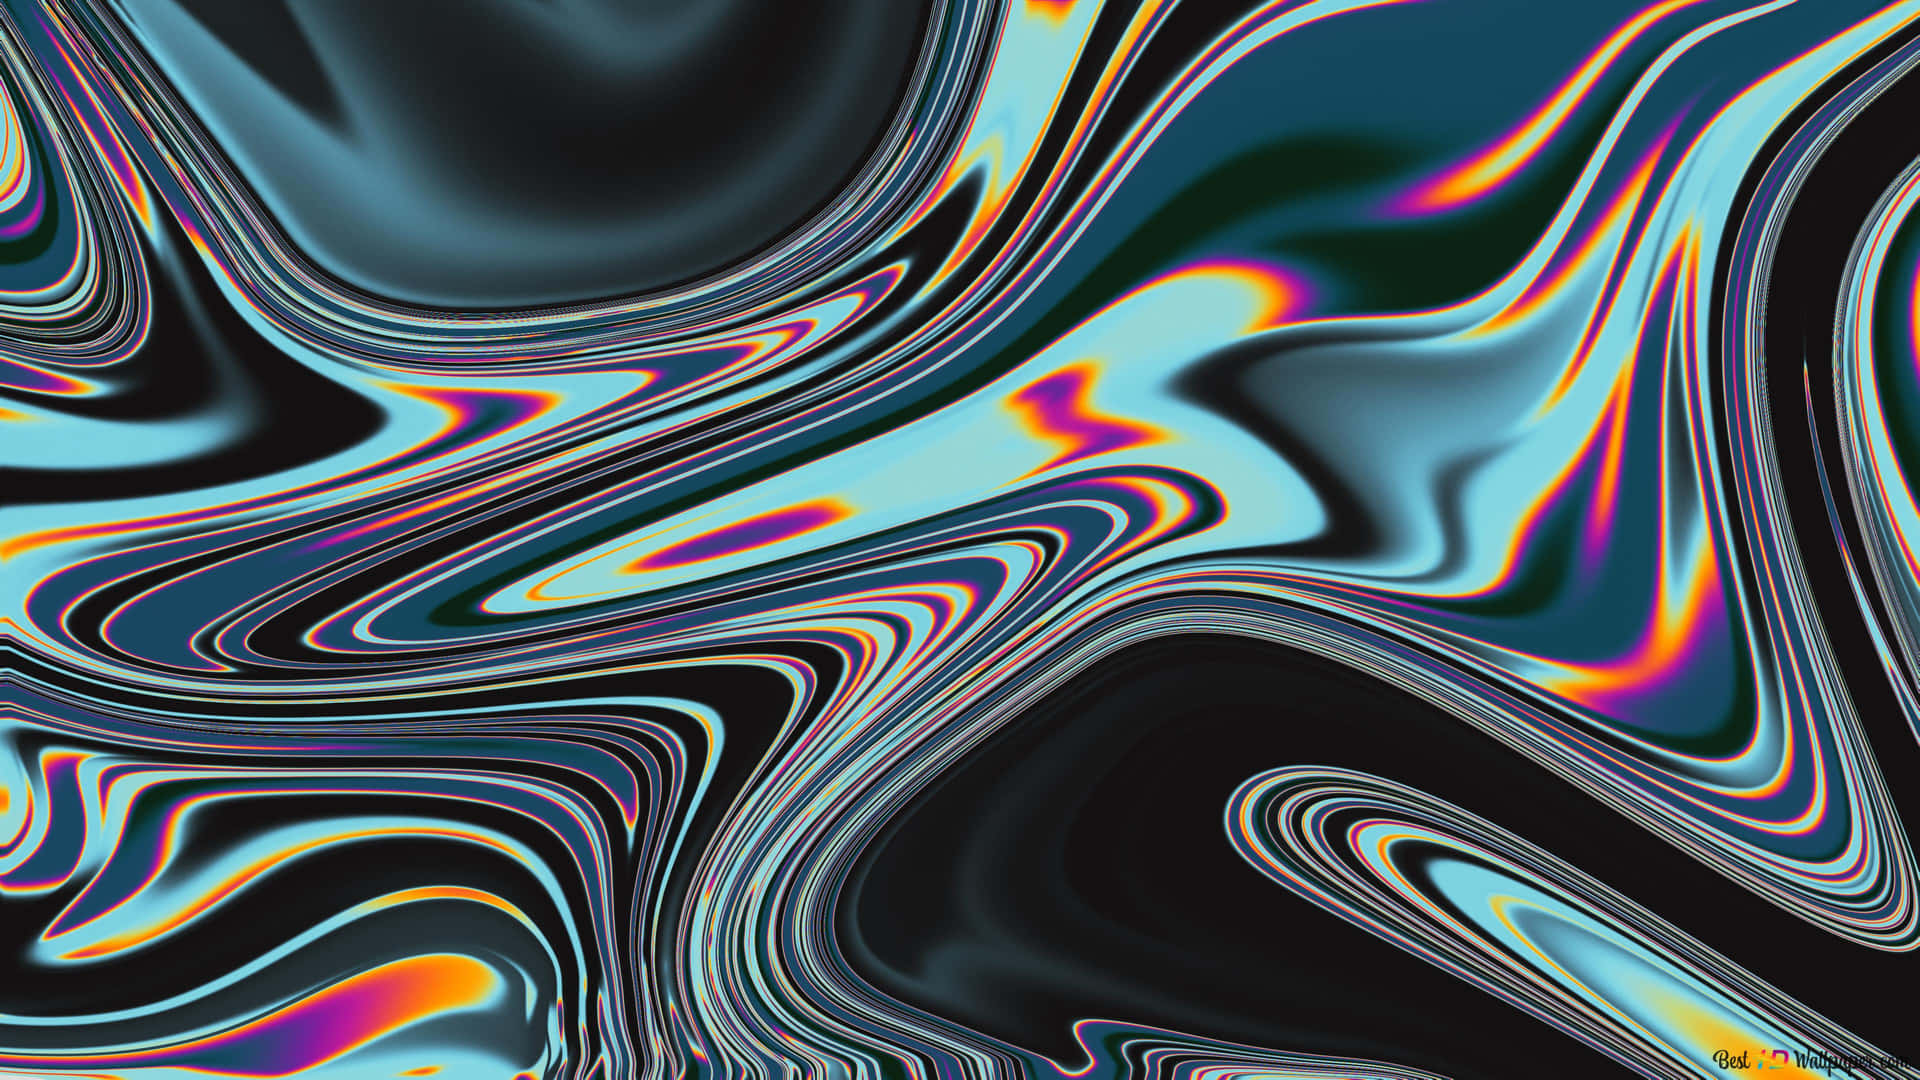 A Colorful Abstract Background With Swirls Wallpaper